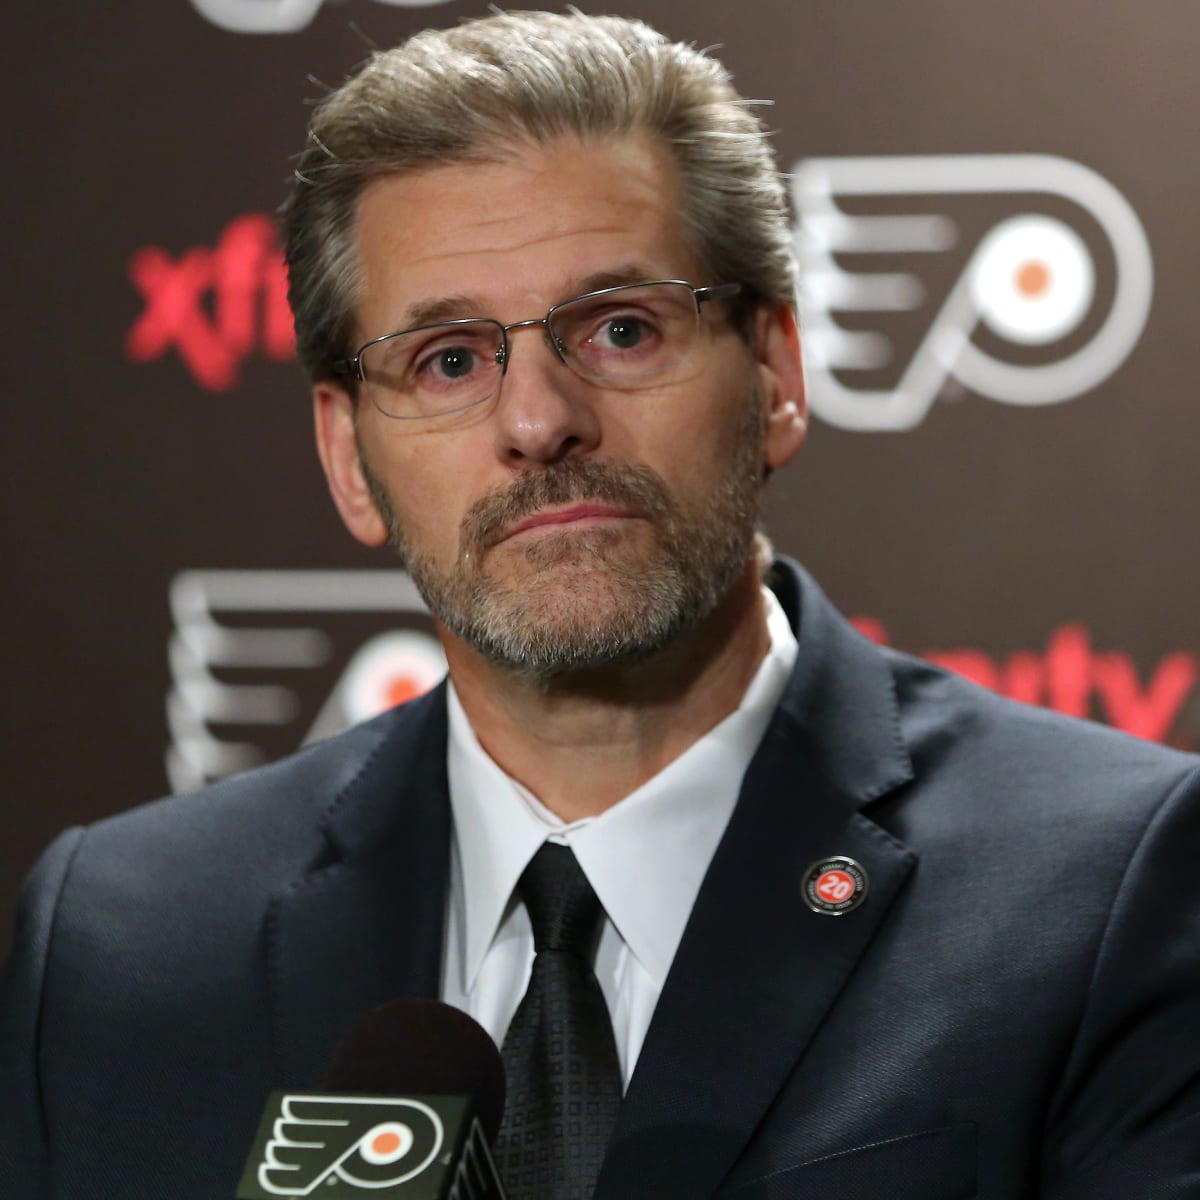 Former Flyer Ron Hextall fired as Penguins general manager